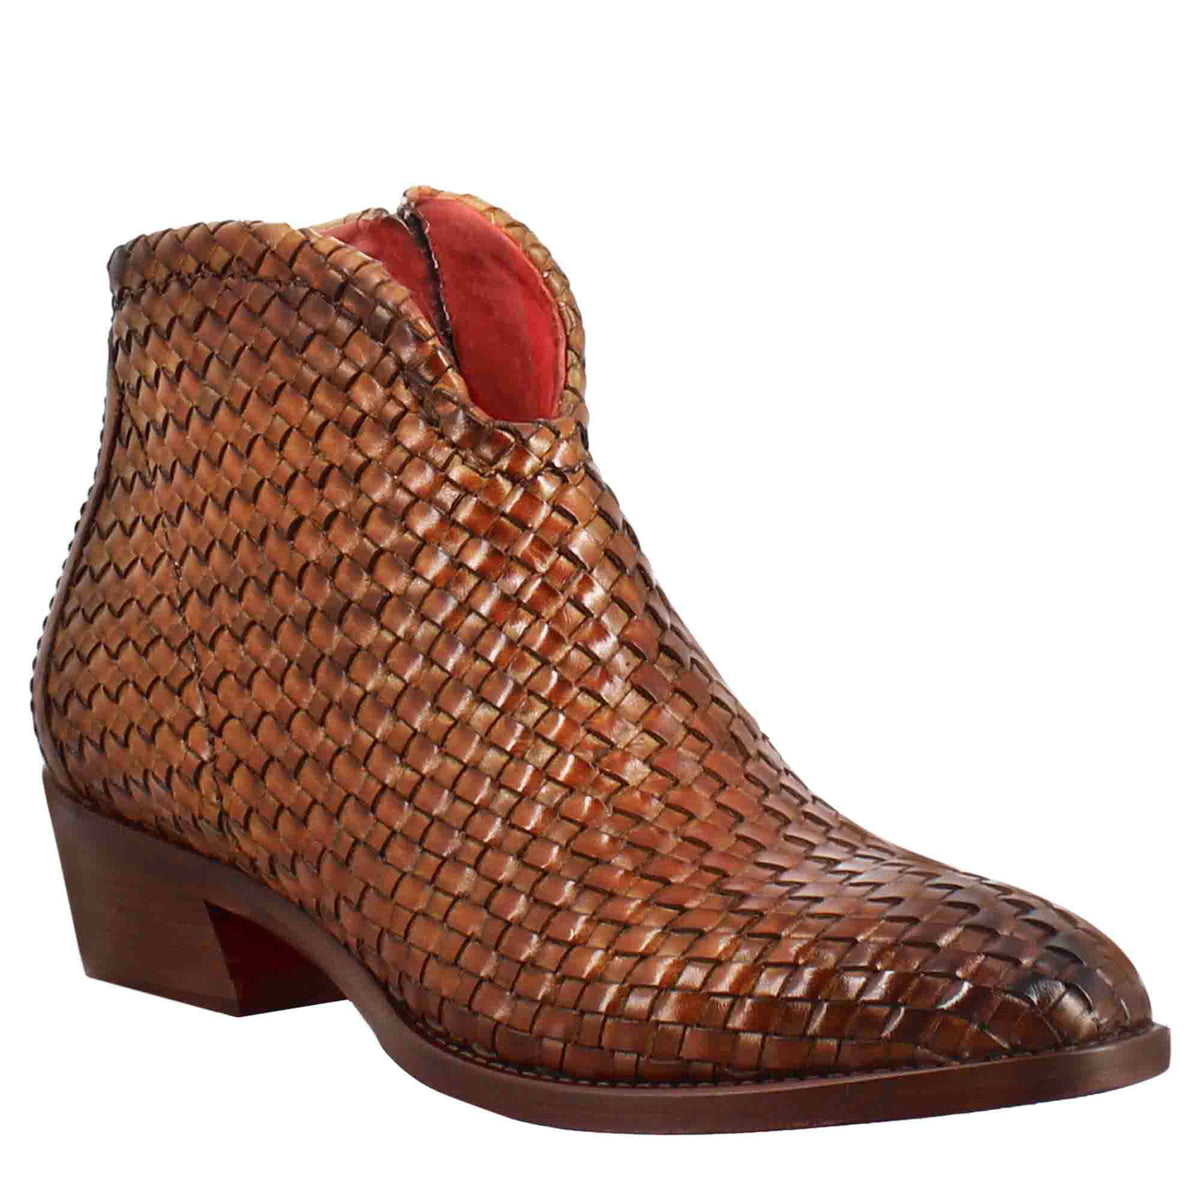 Women's ankle boot with medium heel in light brown woven leather